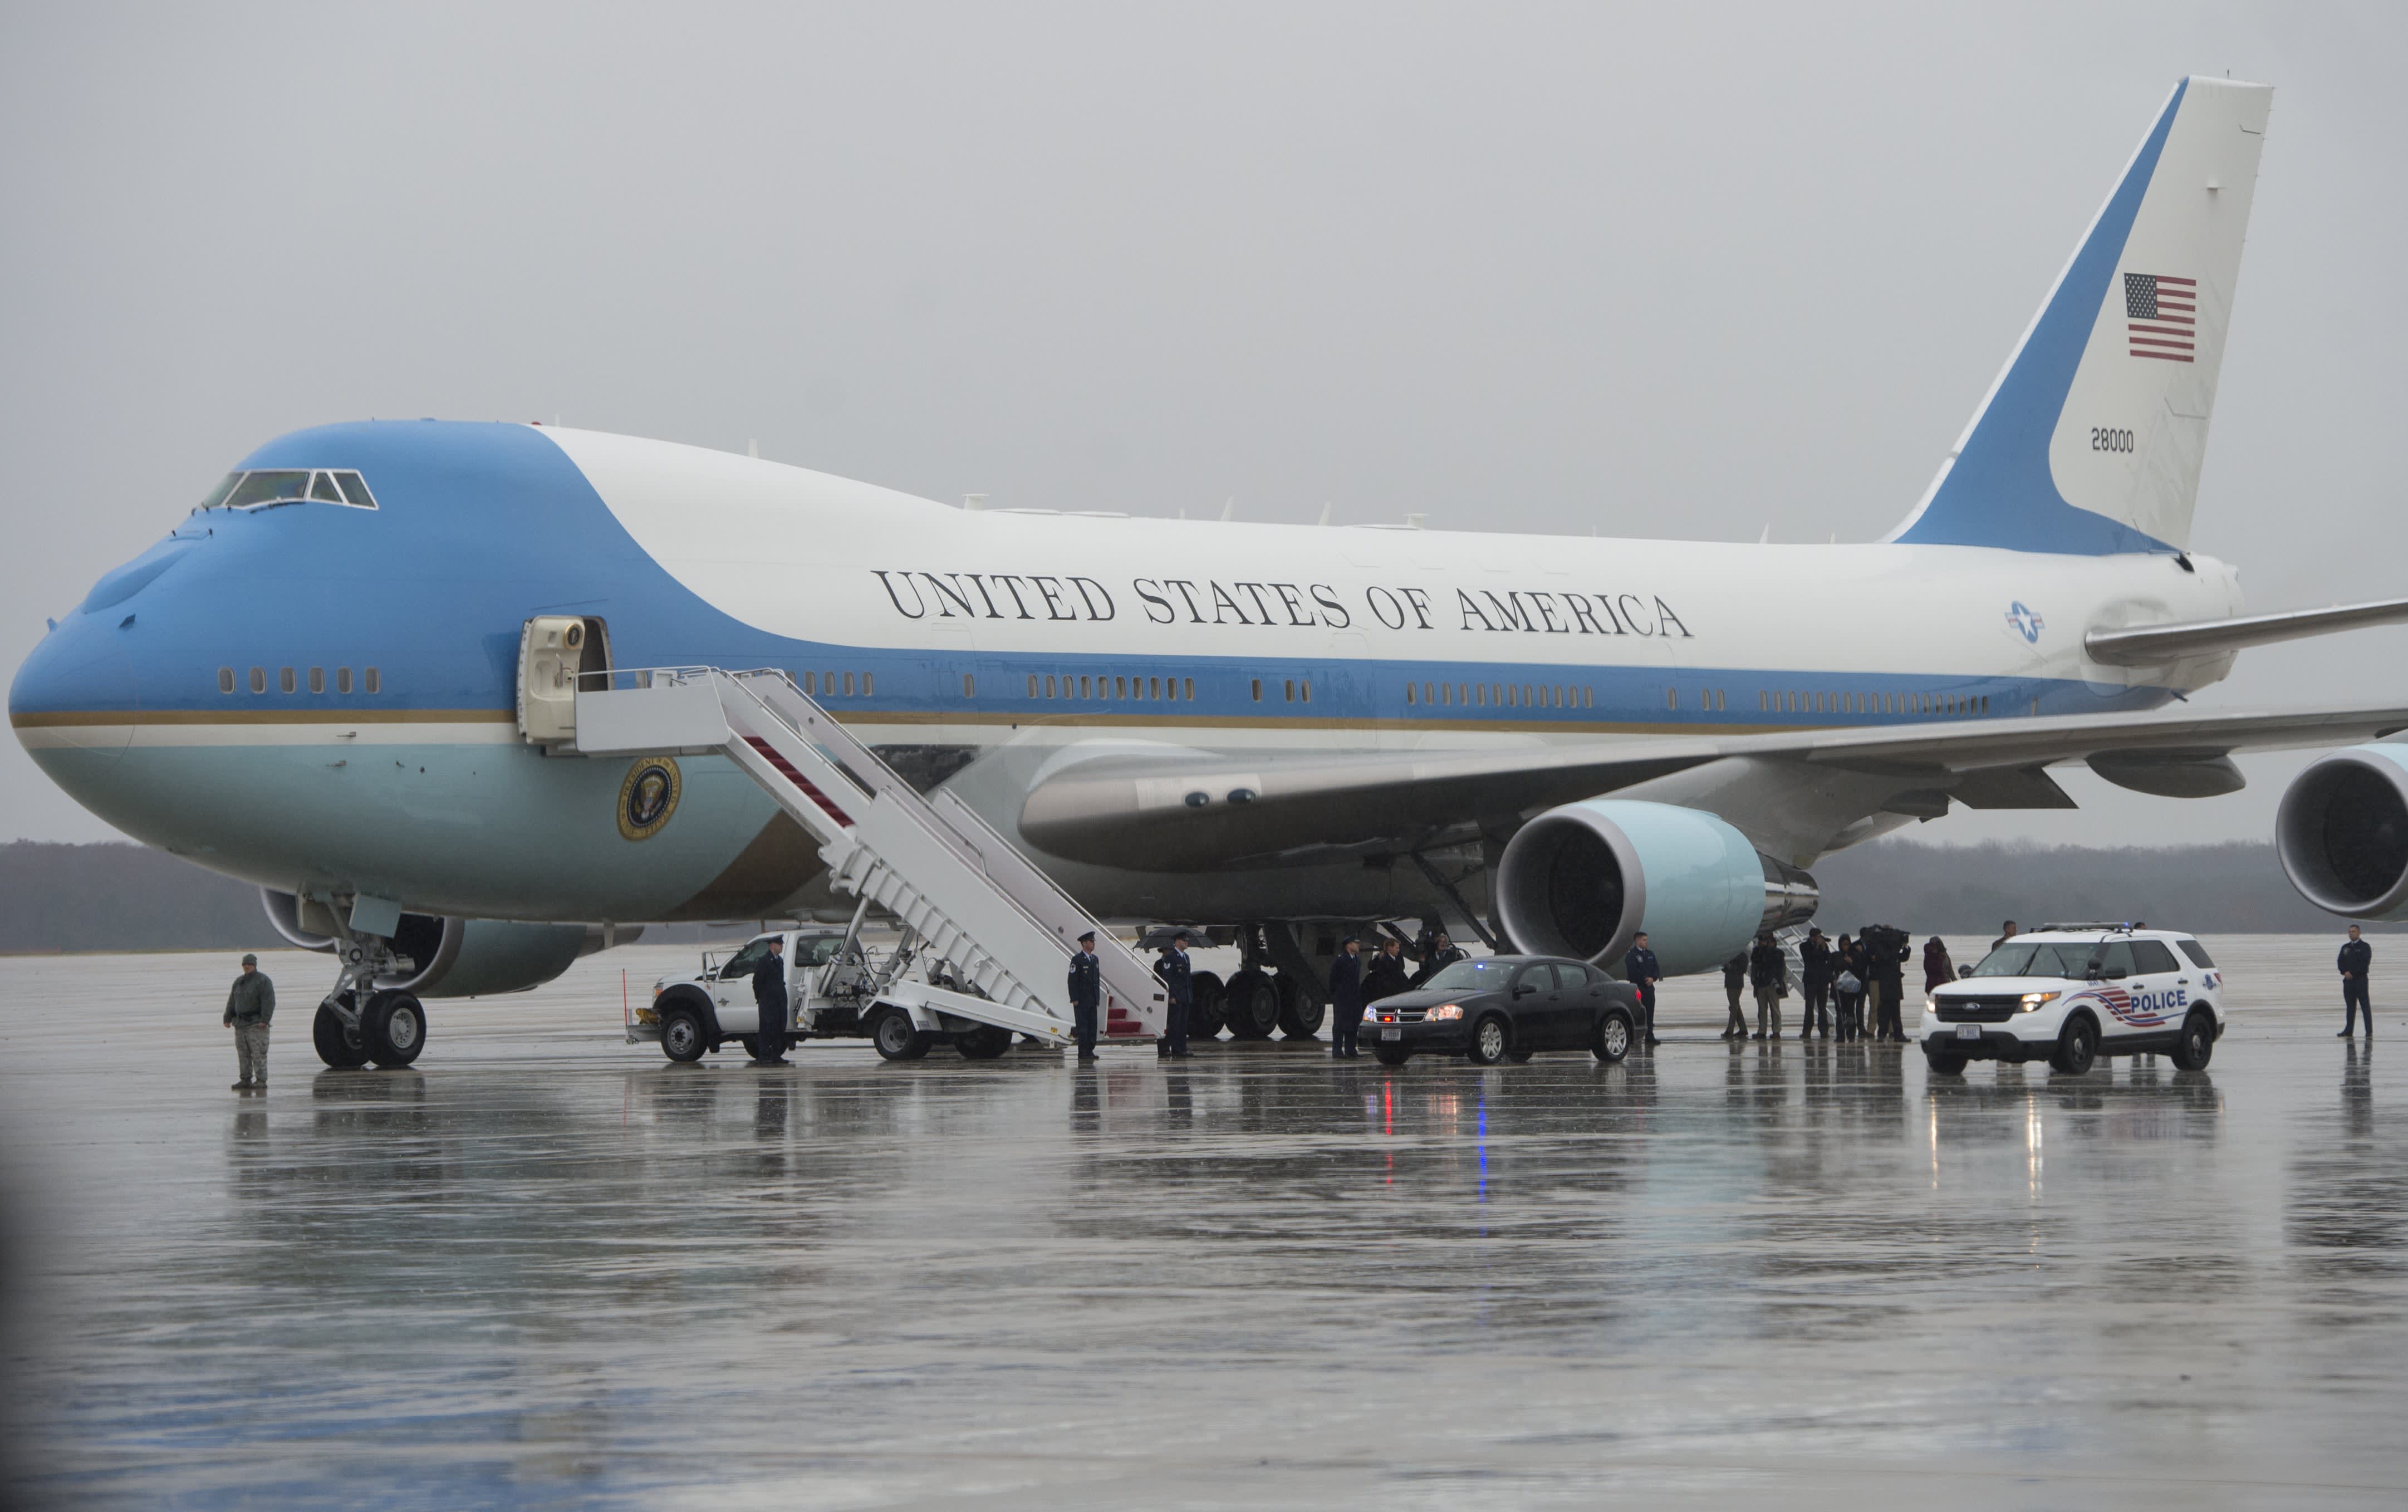 Air Force One: A guide to the features, amenities